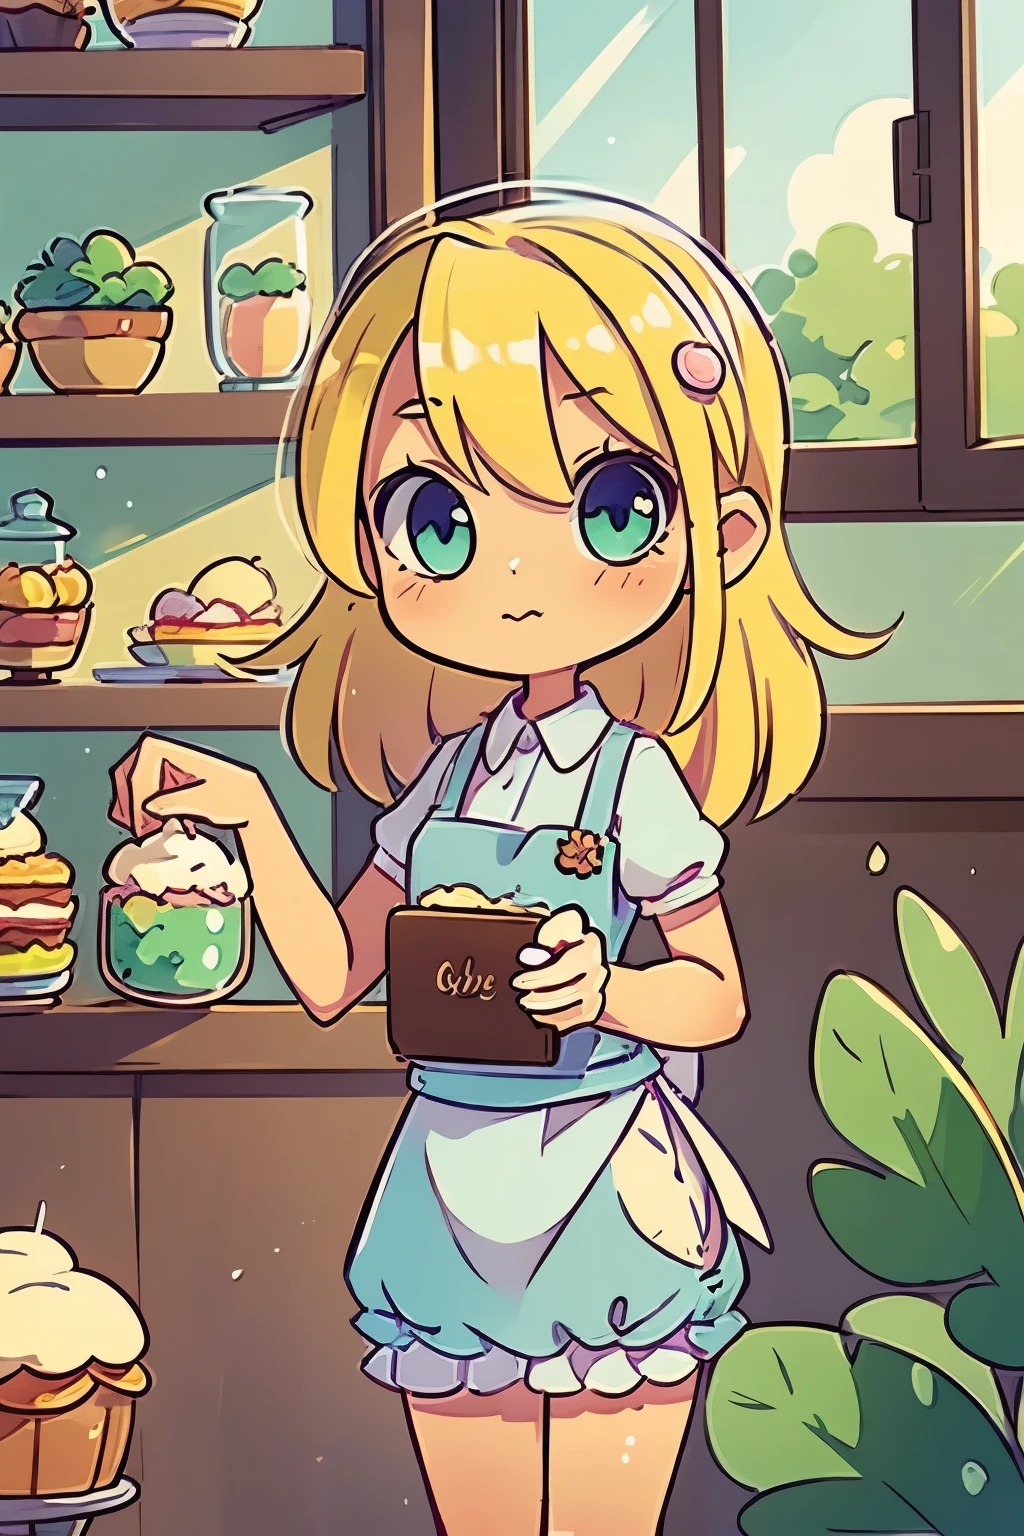 masterpiece, highly detailed, (chibi:1.3), , (1girl), blonde hair, pastel colors, cozy atmosphere, dessert display case, macarons, cupcakes, tarts, cakes, coffee machine, chalkboard menu, natural lighting, glass jars filled with candy, frosted window panes, decorative plates, whimsical decor, sugar sculptures,
